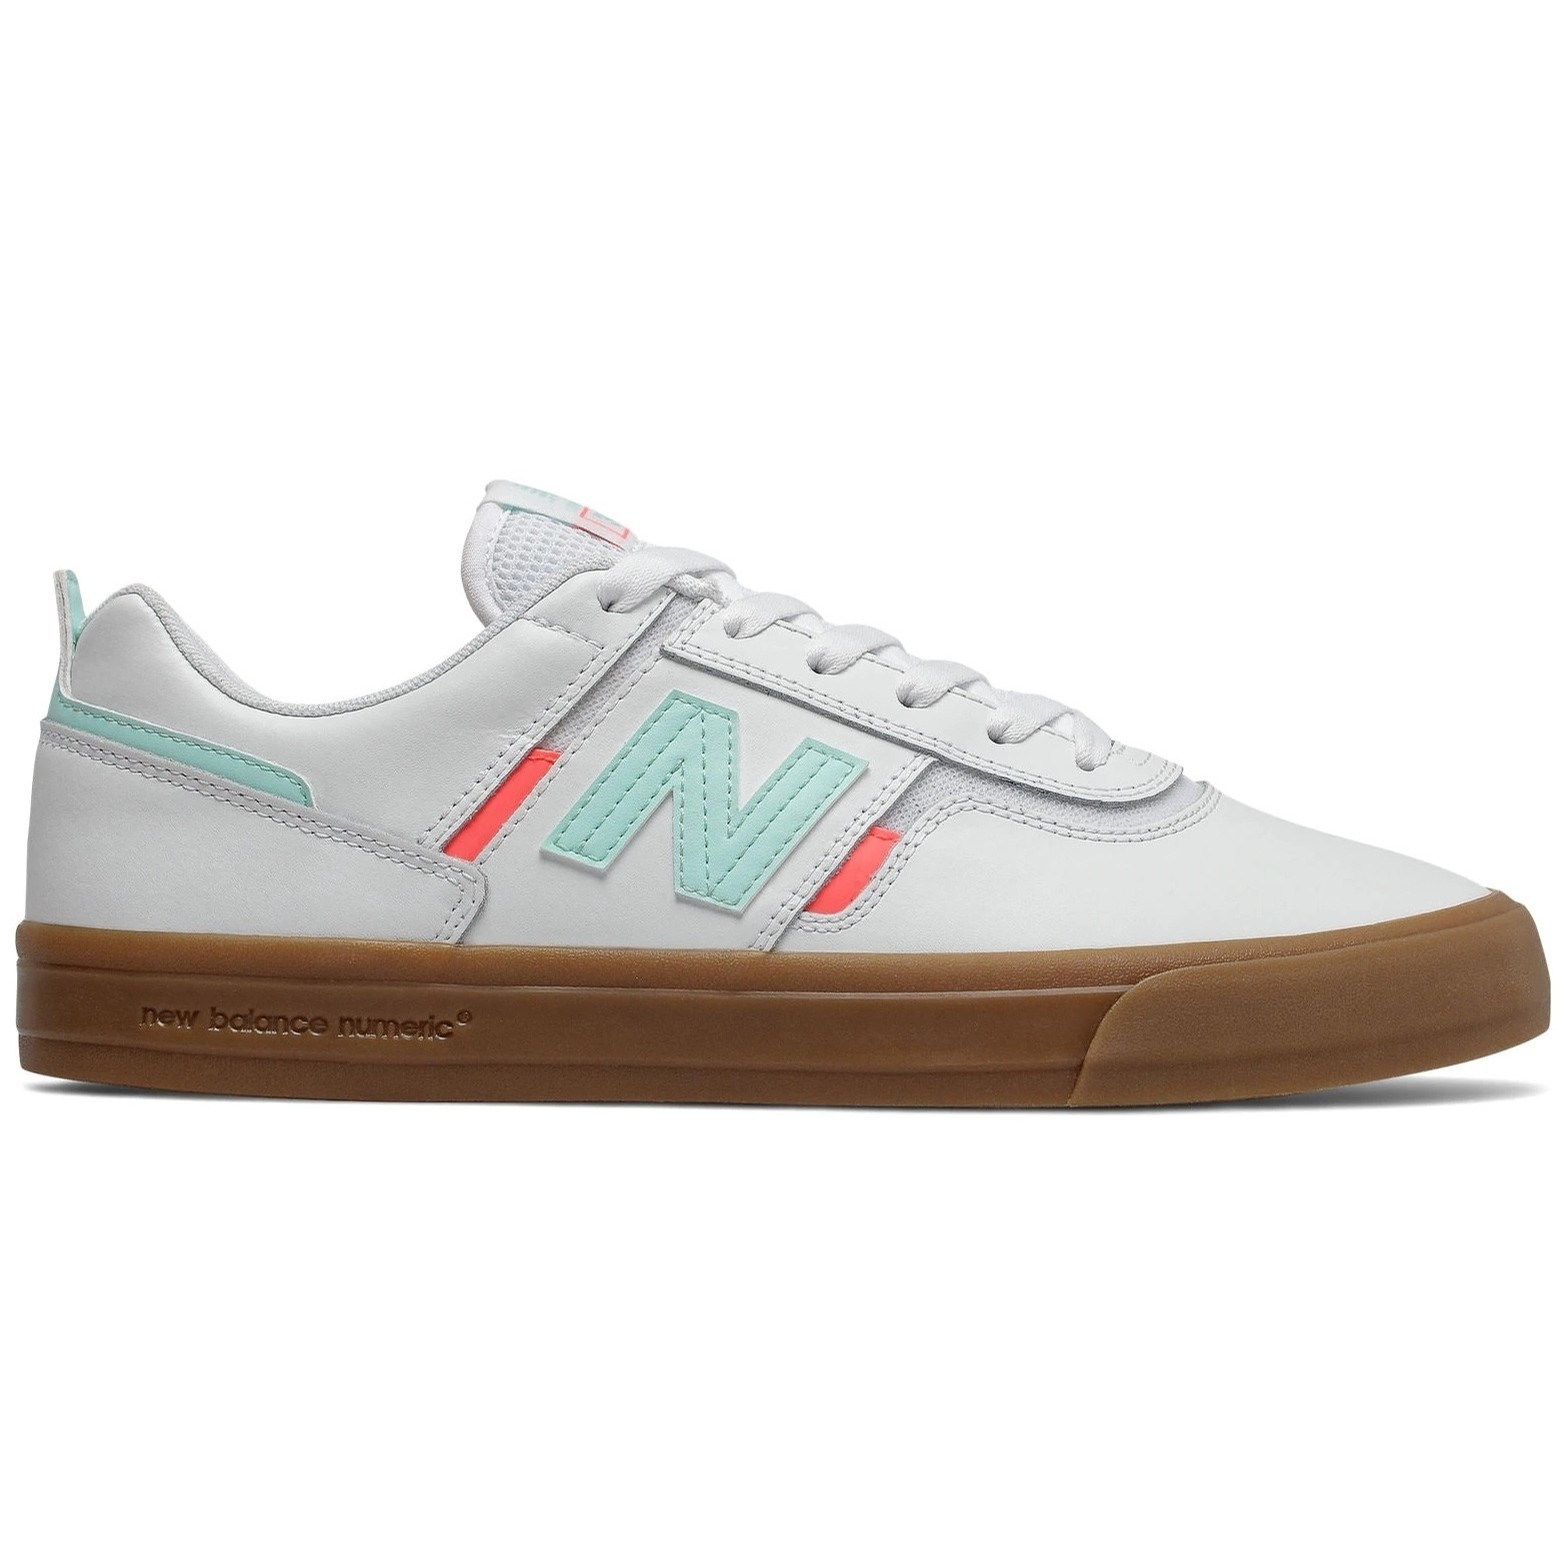 New Balance NM306 Jamie Foy Shoe (White/Gum/Teal) Shoes at ...